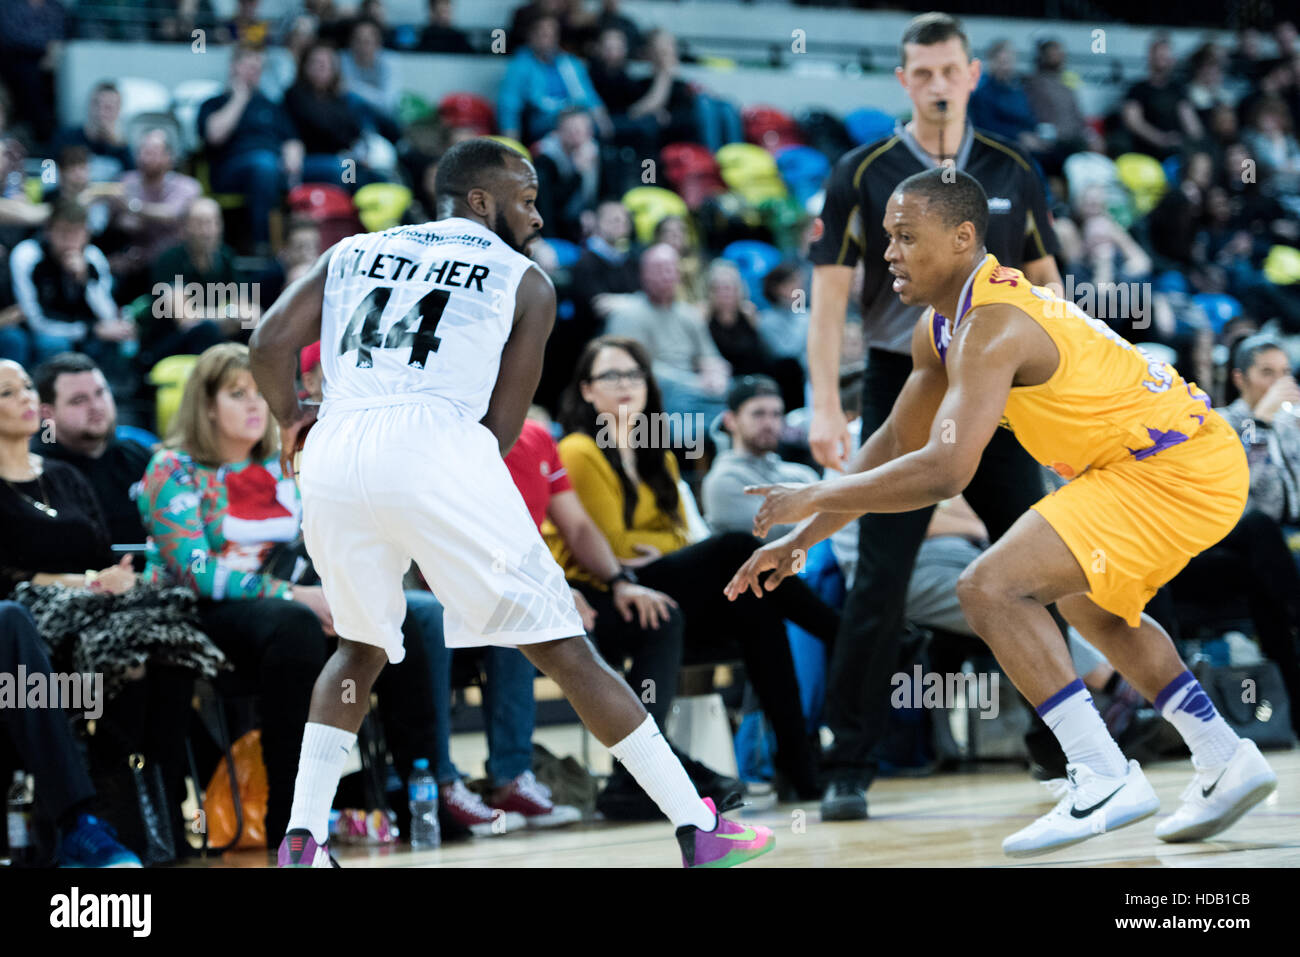 London, UK, 11 December 2016.  Newcastle Eagles beat London Lions 87 vs 80 in an exciting basketball game in the Copper box arena   Credit: pmgimaging/Alamy Live News Stock Photo